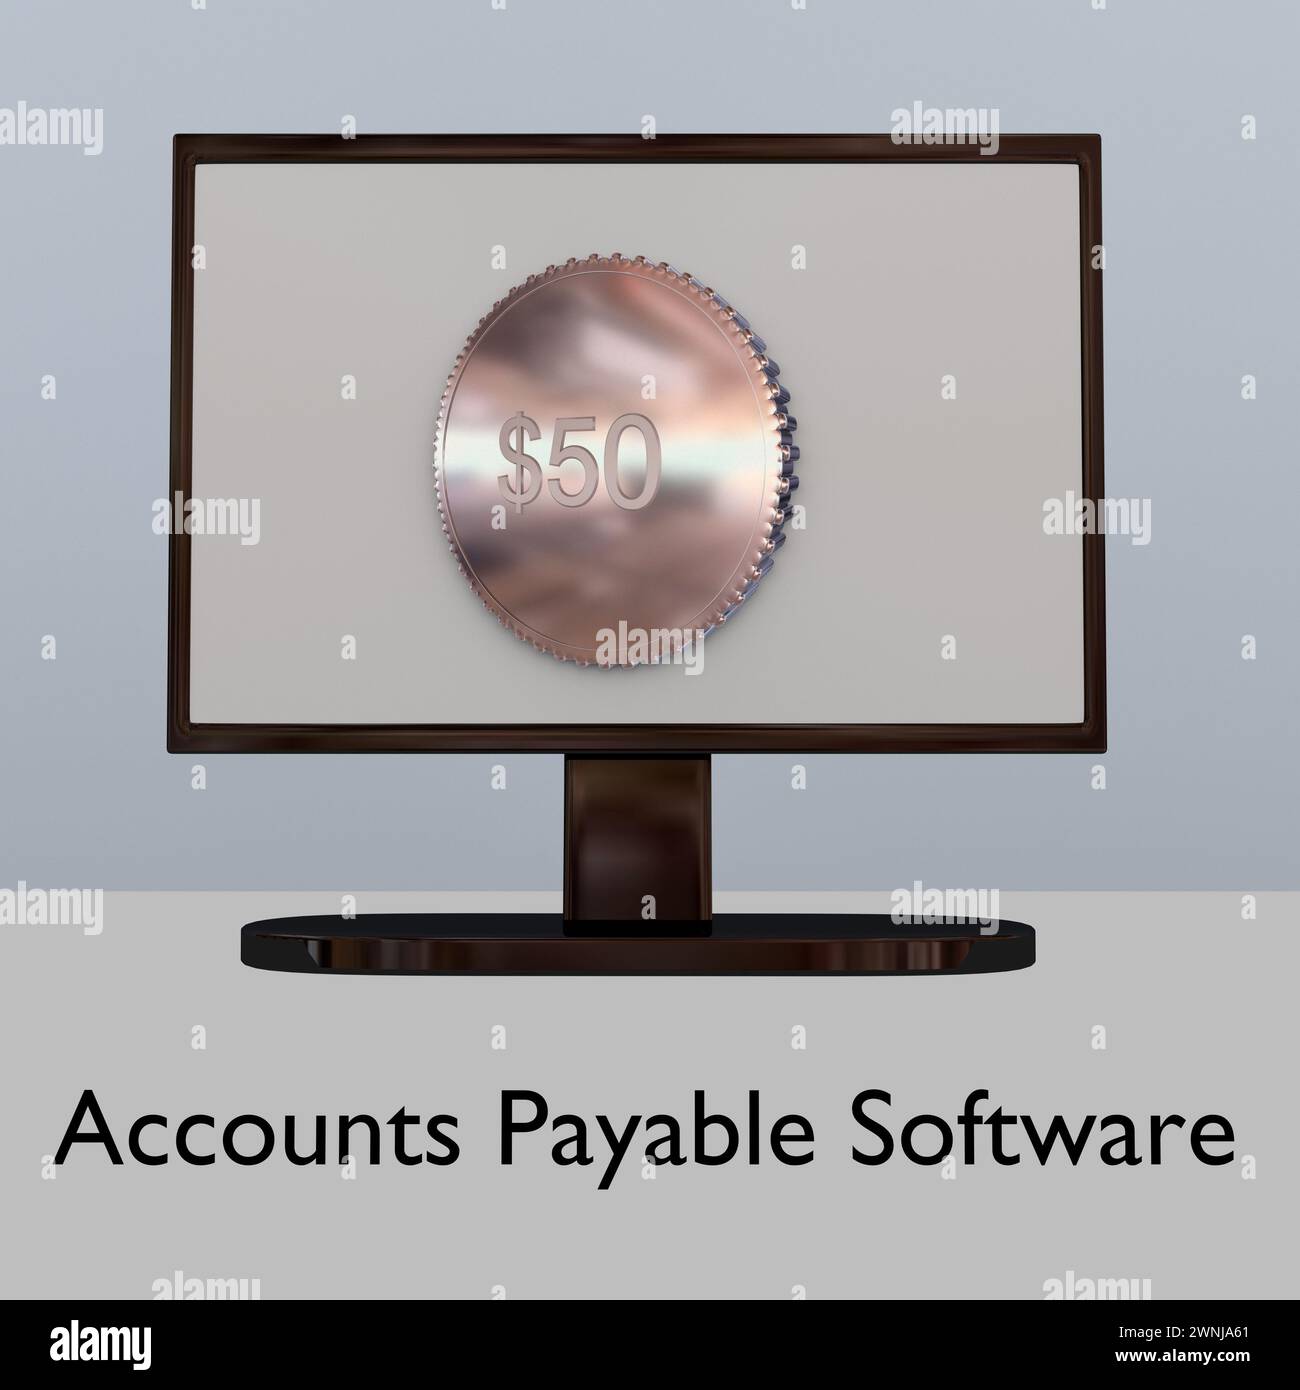 .3D illustration of a $50 coin on pc screen, titled as Accounts Payable Software. Stock Photo